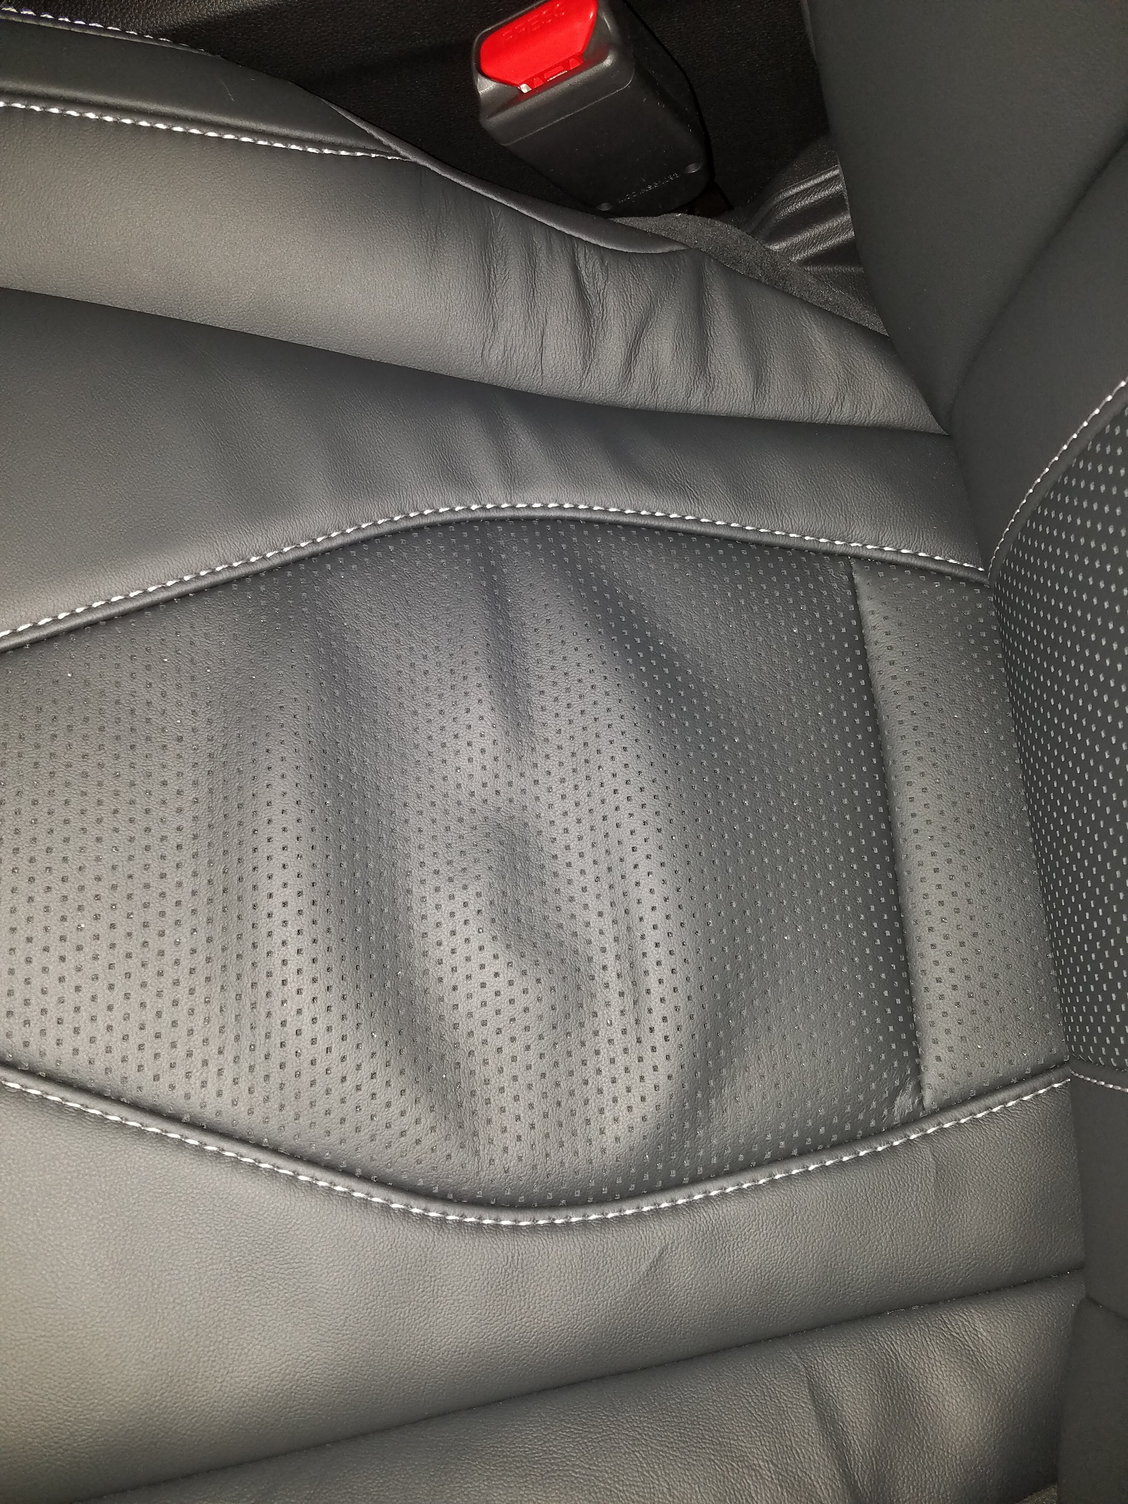 Upholstery/leather Seat Repair? - AcuraZine - Acura Enthusiast Community